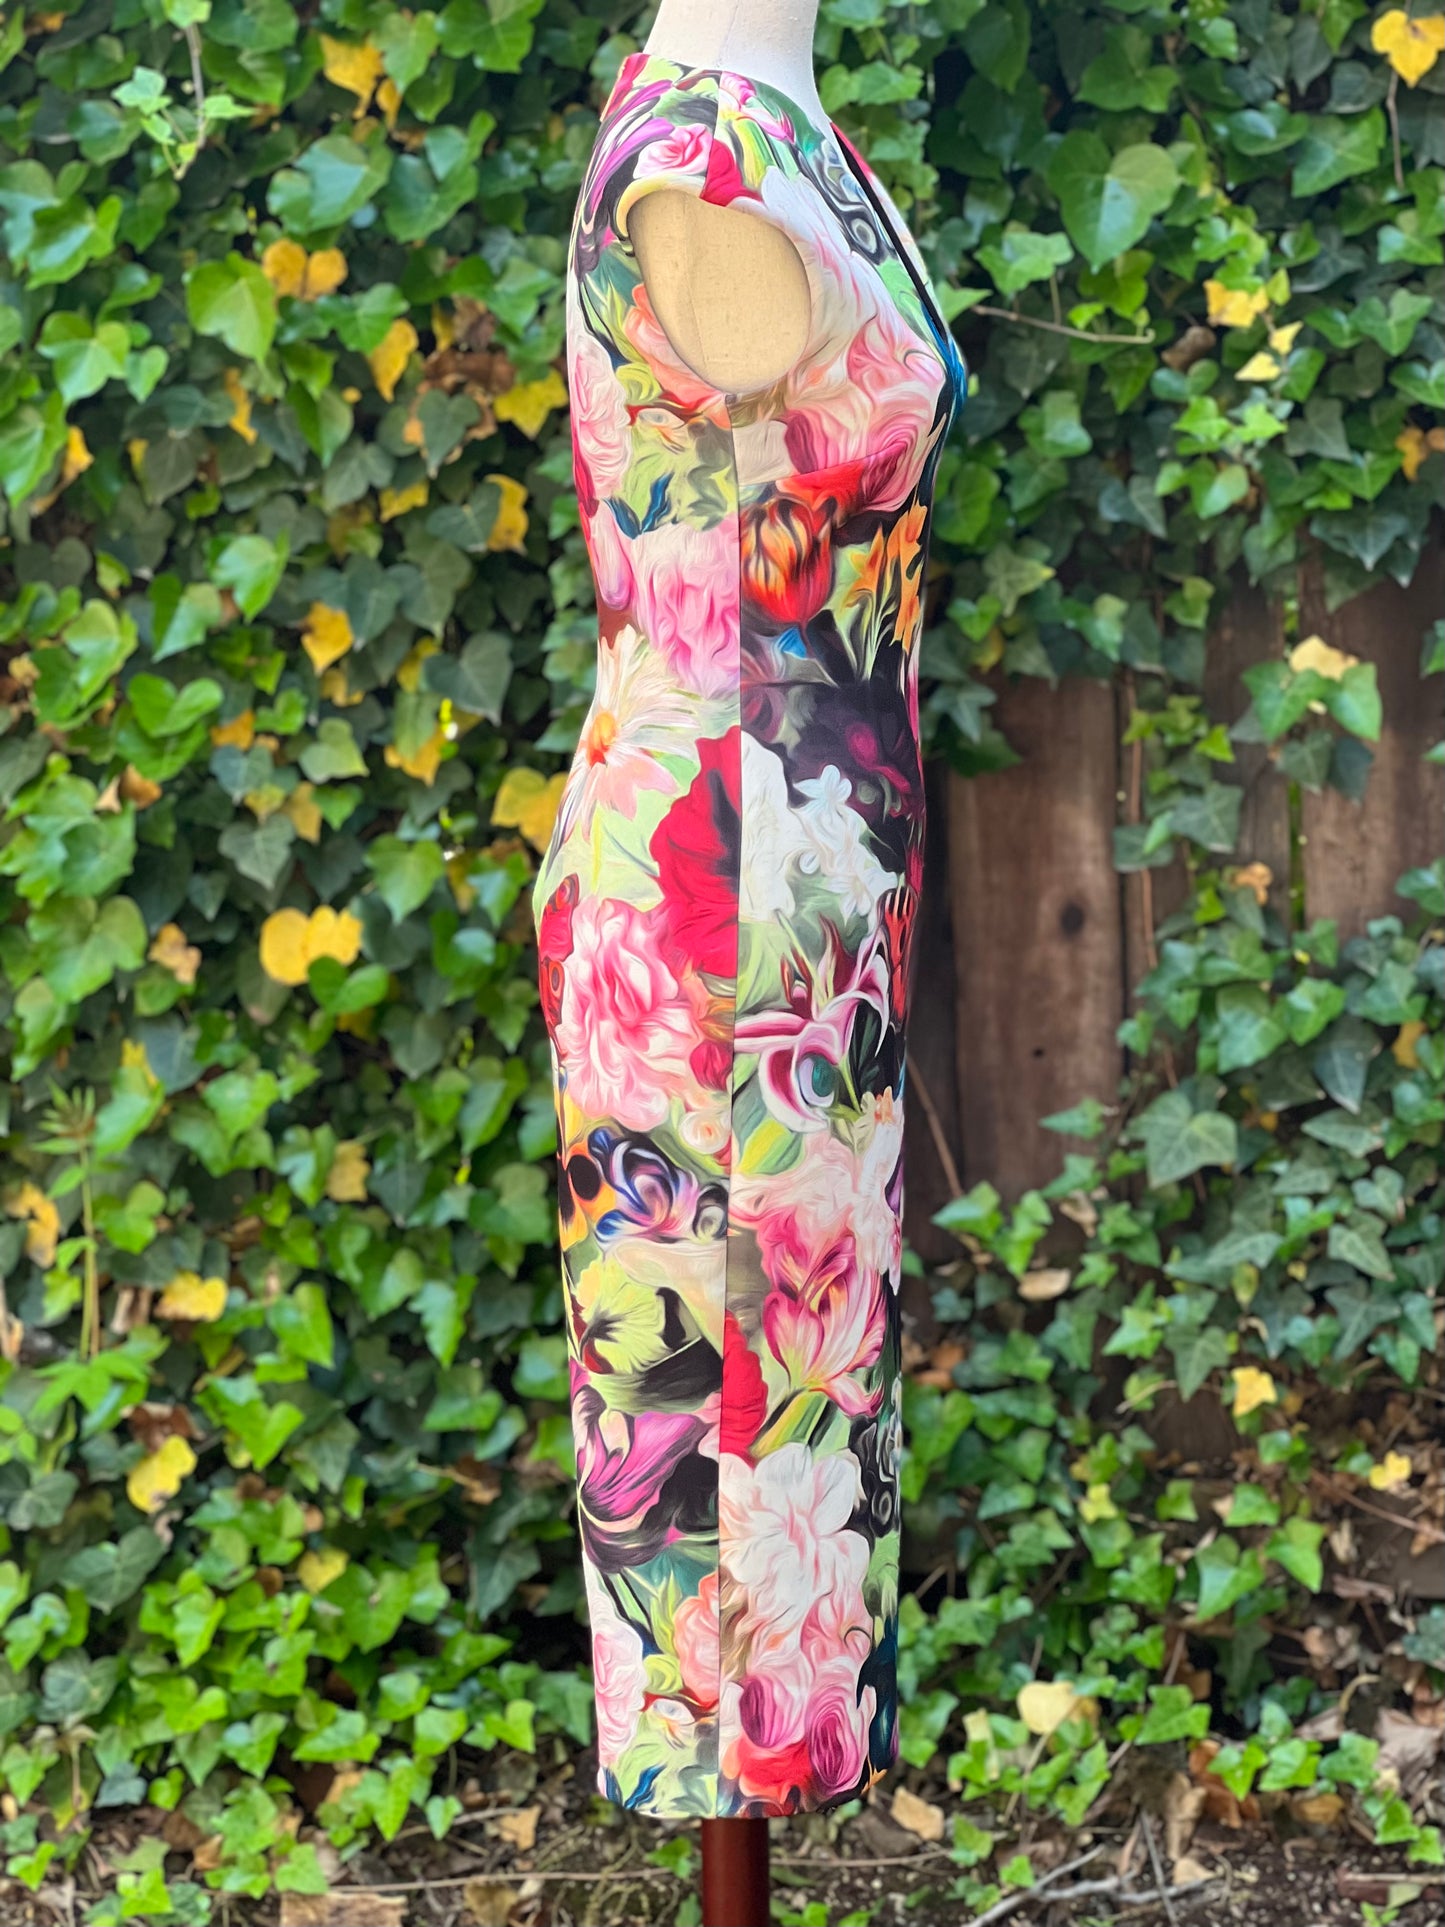 Ted Baker Floral Watercolor Neoprene Sheath Cocktail Dress Size S